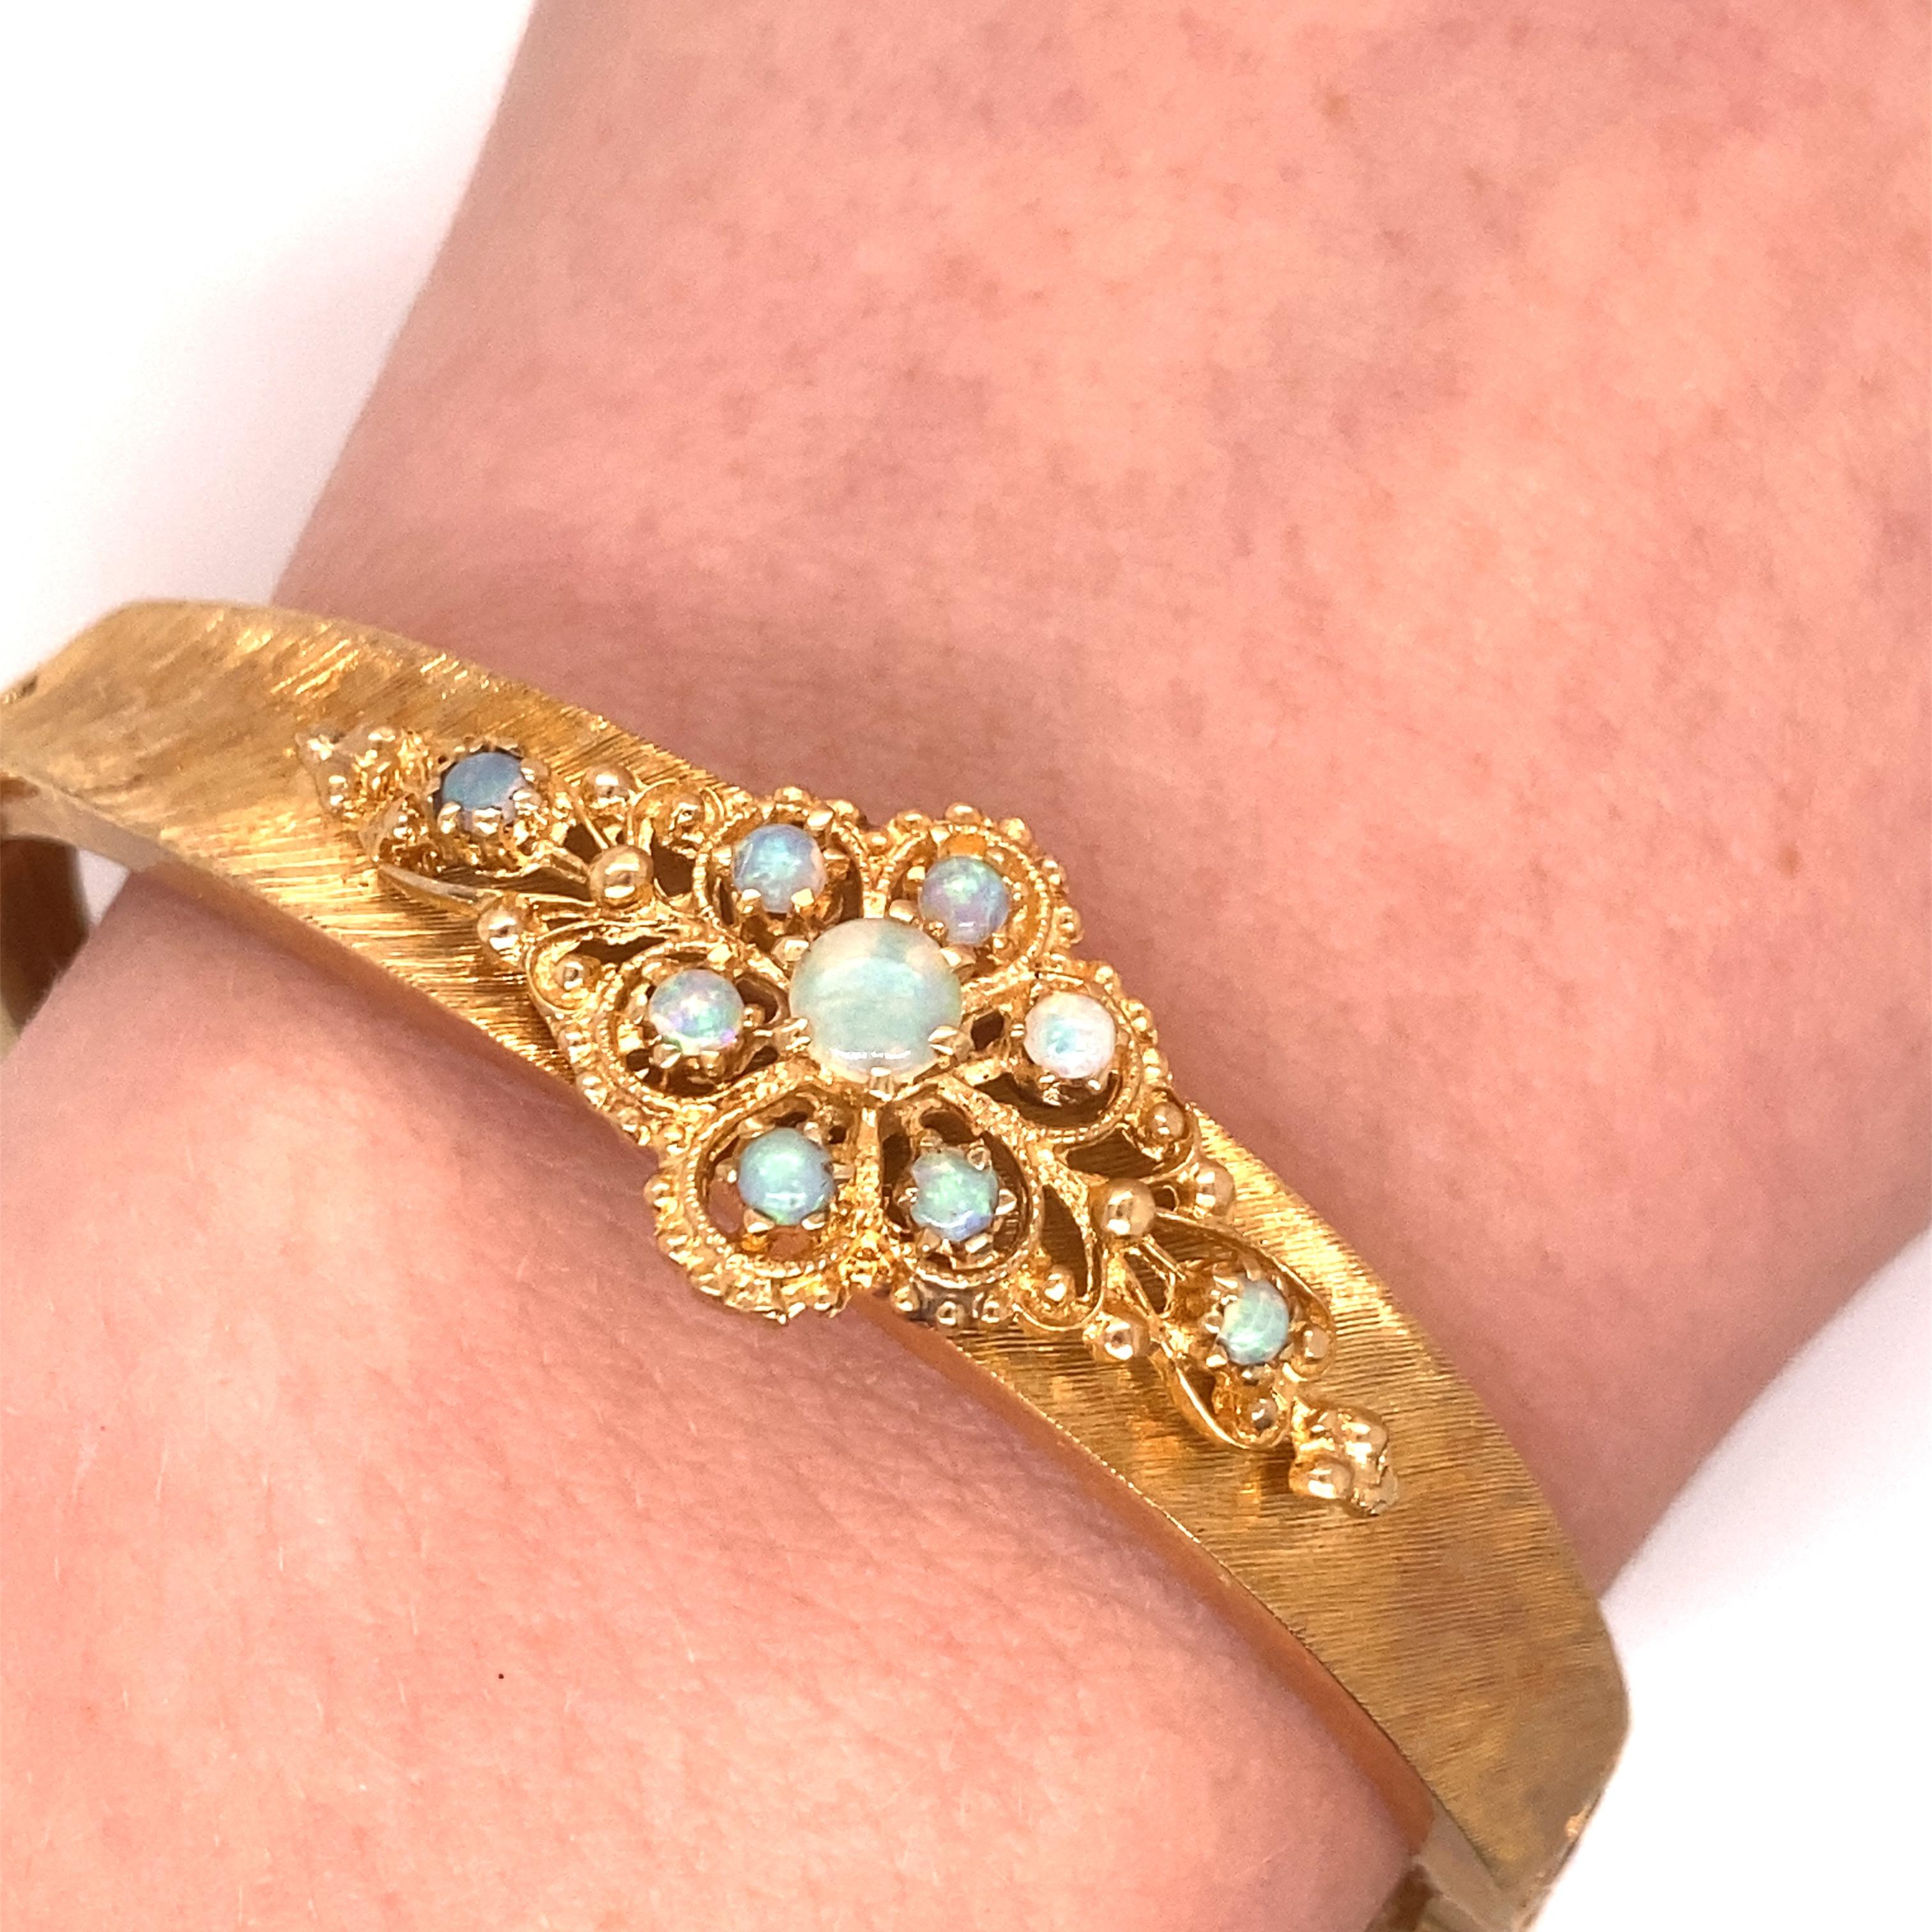 Vintage 14K Yellow Gold Victorian Reproduction Opal Bangle Bracelet - The bangle contains 9 round opals with green/blue play of color. The filigree design is mounted on a florentine finish bangle. The bangle measures .50 inches wide. The inside